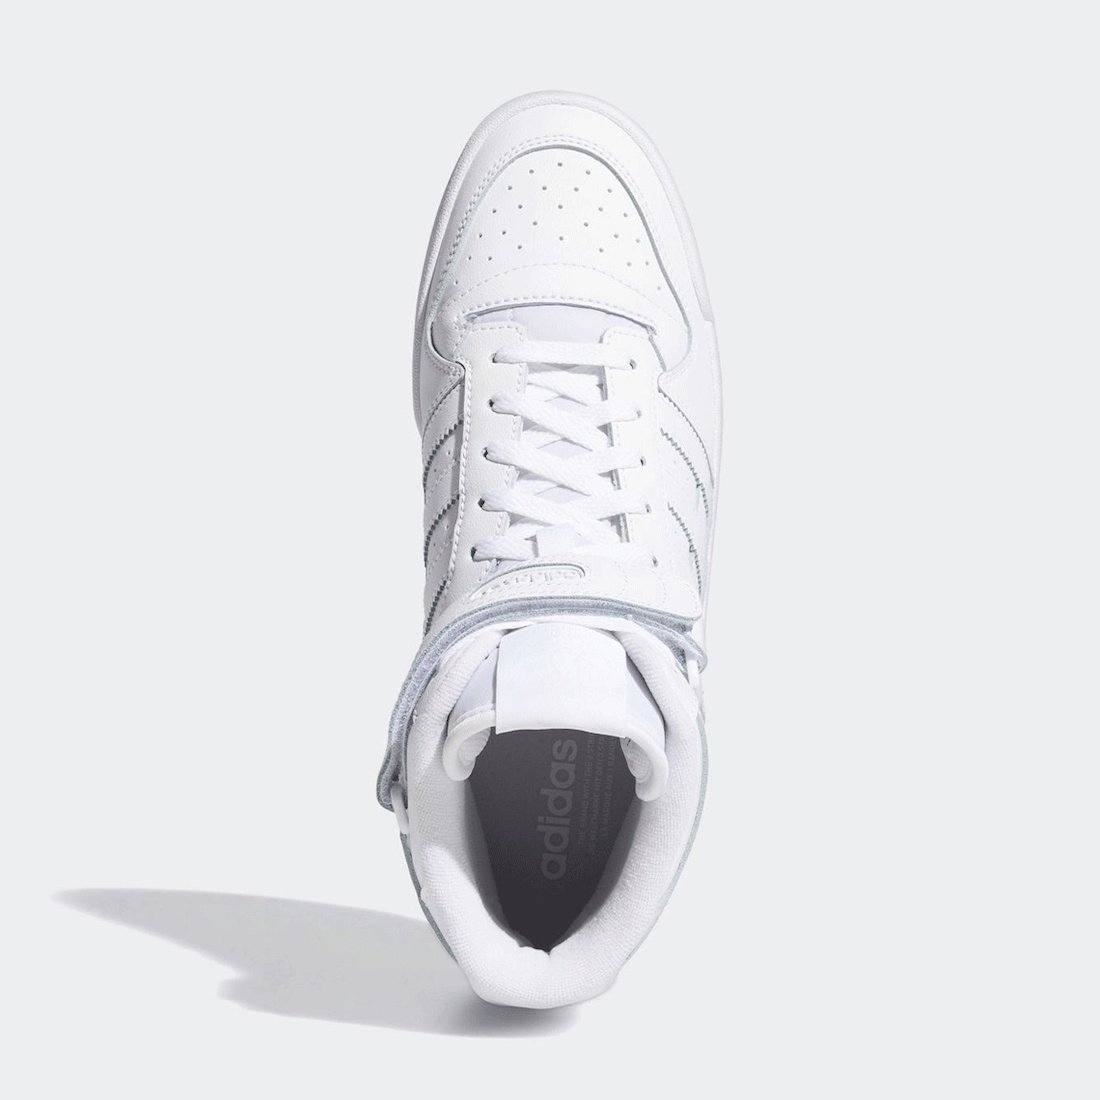 adidas Forum Mid Triple White FY4975 Release Date Info